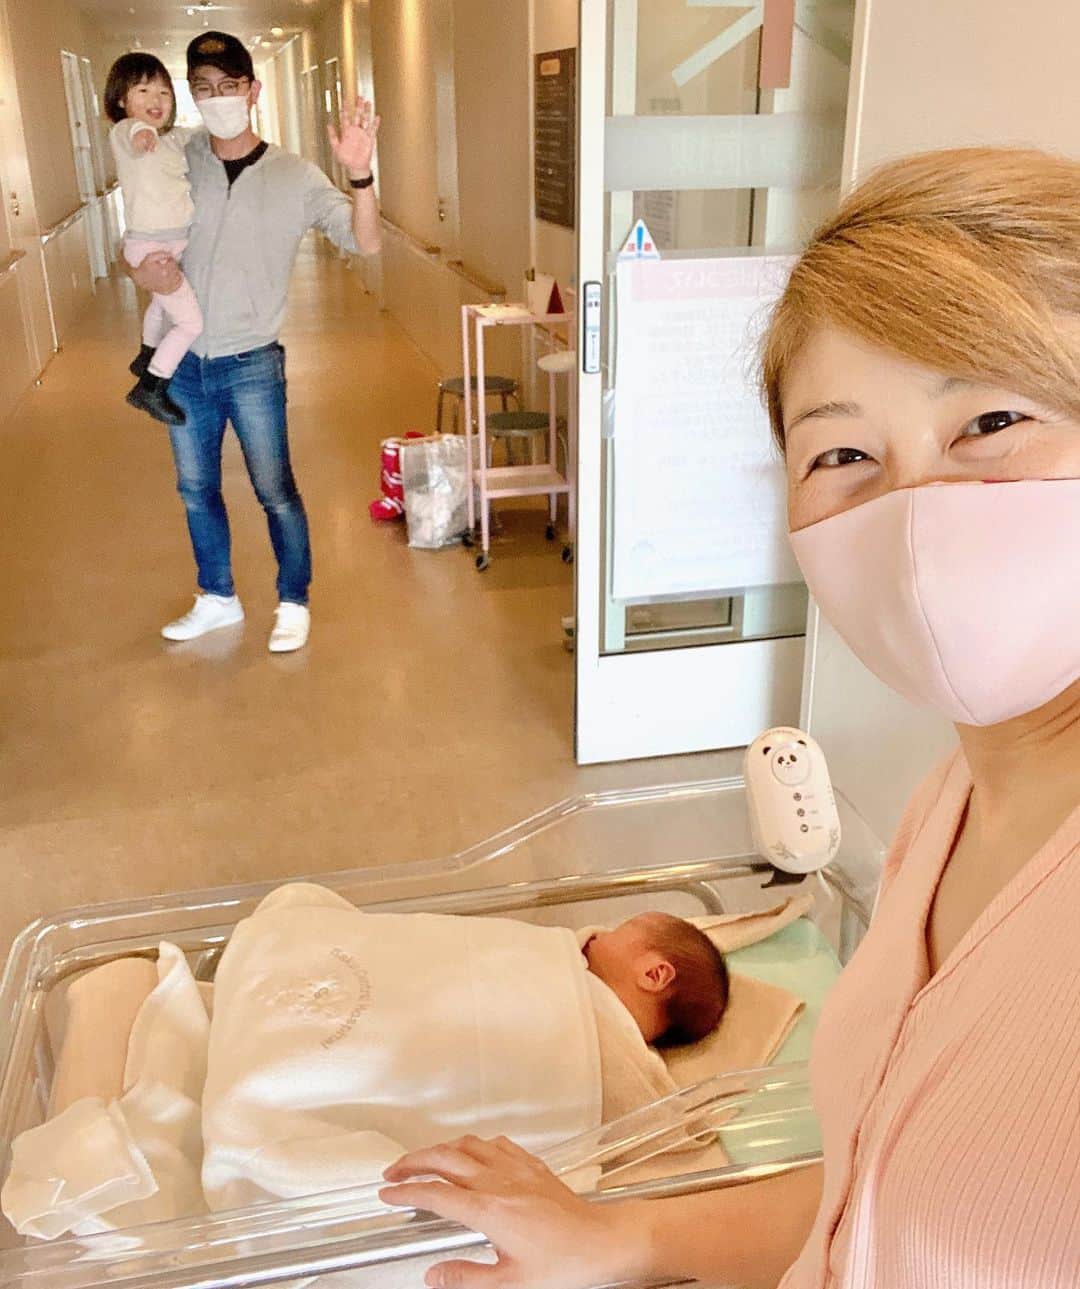 吉田ちかさんのインスタグラム写真 - (吉田ちかInstagram)「First ever family photo with our new baby!  We aren’t allowed any visitors at the hospital, but I was able to see Osaru-san and Pudding for a few seconds at the door when they came to drop off some things for me yesterday😊  Pudding got a glimpse of her little brother and her face just lit up like I had never seen before❤️  I told her we’d be home soon and she just nodded smiling😊 She has grown up so much in the last 3 weeks!   She has never spent this much time away from me and I know it must have been really hard on her, but she barely cried and was so strong through it all!   Watching her walk down the hall holding daddy’s hand made me so emotional.   We’ll be home soon!!  4人の初めての家族写真📸💕  コロナで面会はできませんが、荷物の受け渡しの際に入り口で一瞬だけプリンとおさるさんに会うことができました。  プリンに赤ちゃんを見せたら今までに見たことのないような笑顔でベビーを見つめていました。お姉ちゃんだ😭 この３週間で本当に成長して🥺💕感動！「もうすぐ帰るからね」と伝えたら、ニコニコしながら「うん！」と頷いてくれました。  こんなに長い間私と離れることなんて一度もなく、本当は寂しかったはずなのに、ほとんど泣かずずっと頑張ってくれました。  パパの手を繋いで廊下を歩いていくプリンの後ろ姿が愛おしくて泣けてきました😭  もうすぐ会えるよ❤️」10月11日 20時34分 - bilingirl_chika